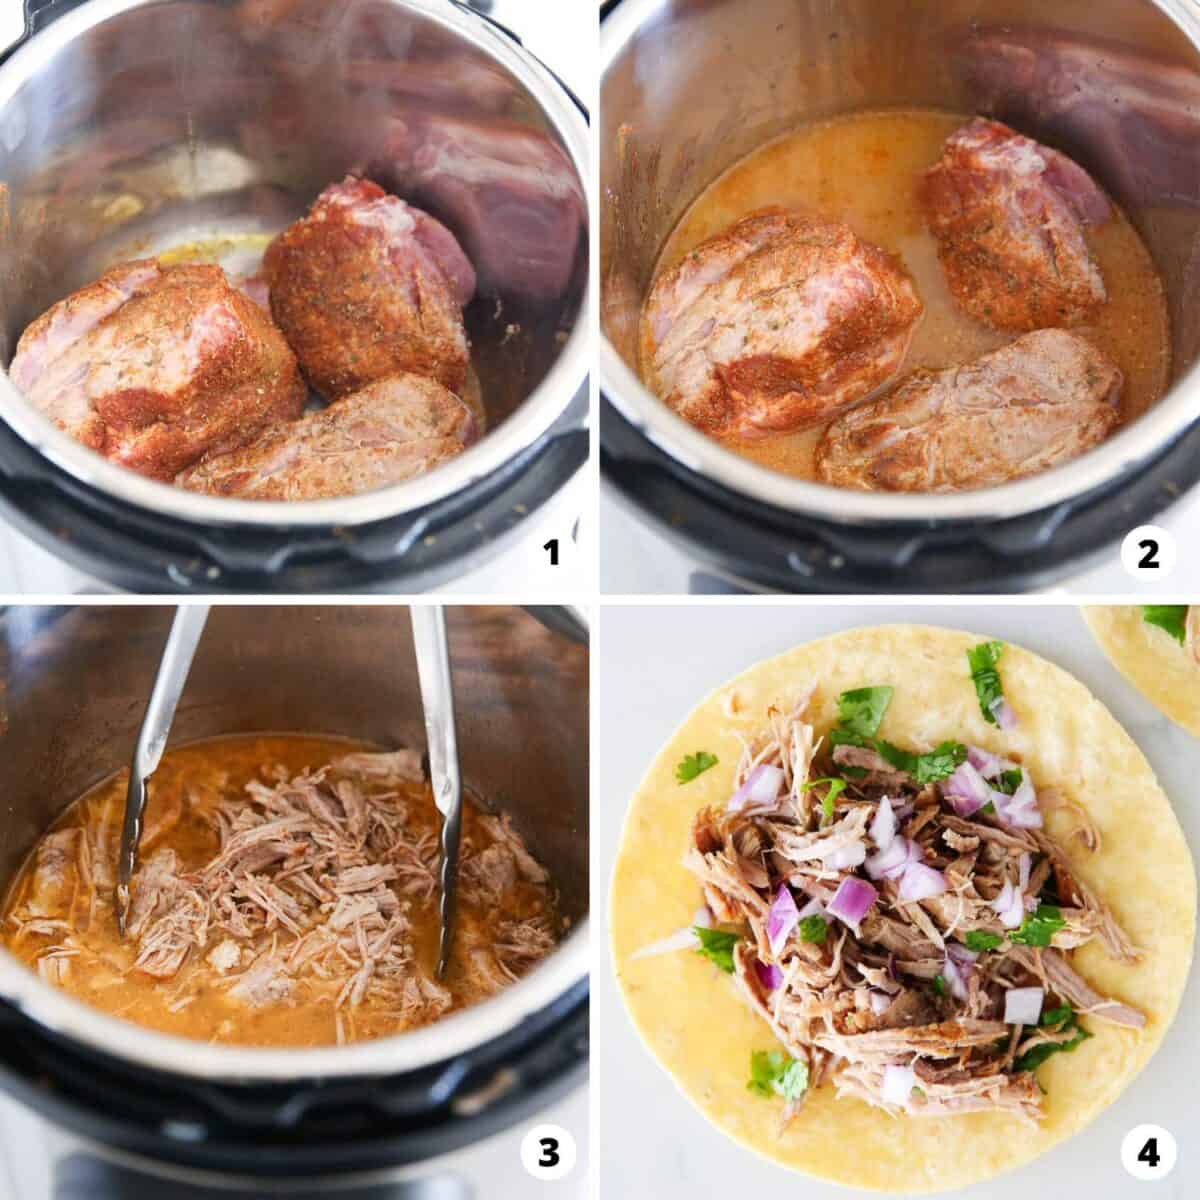 Showing how to make carnitas tacos in a 4 step collage.